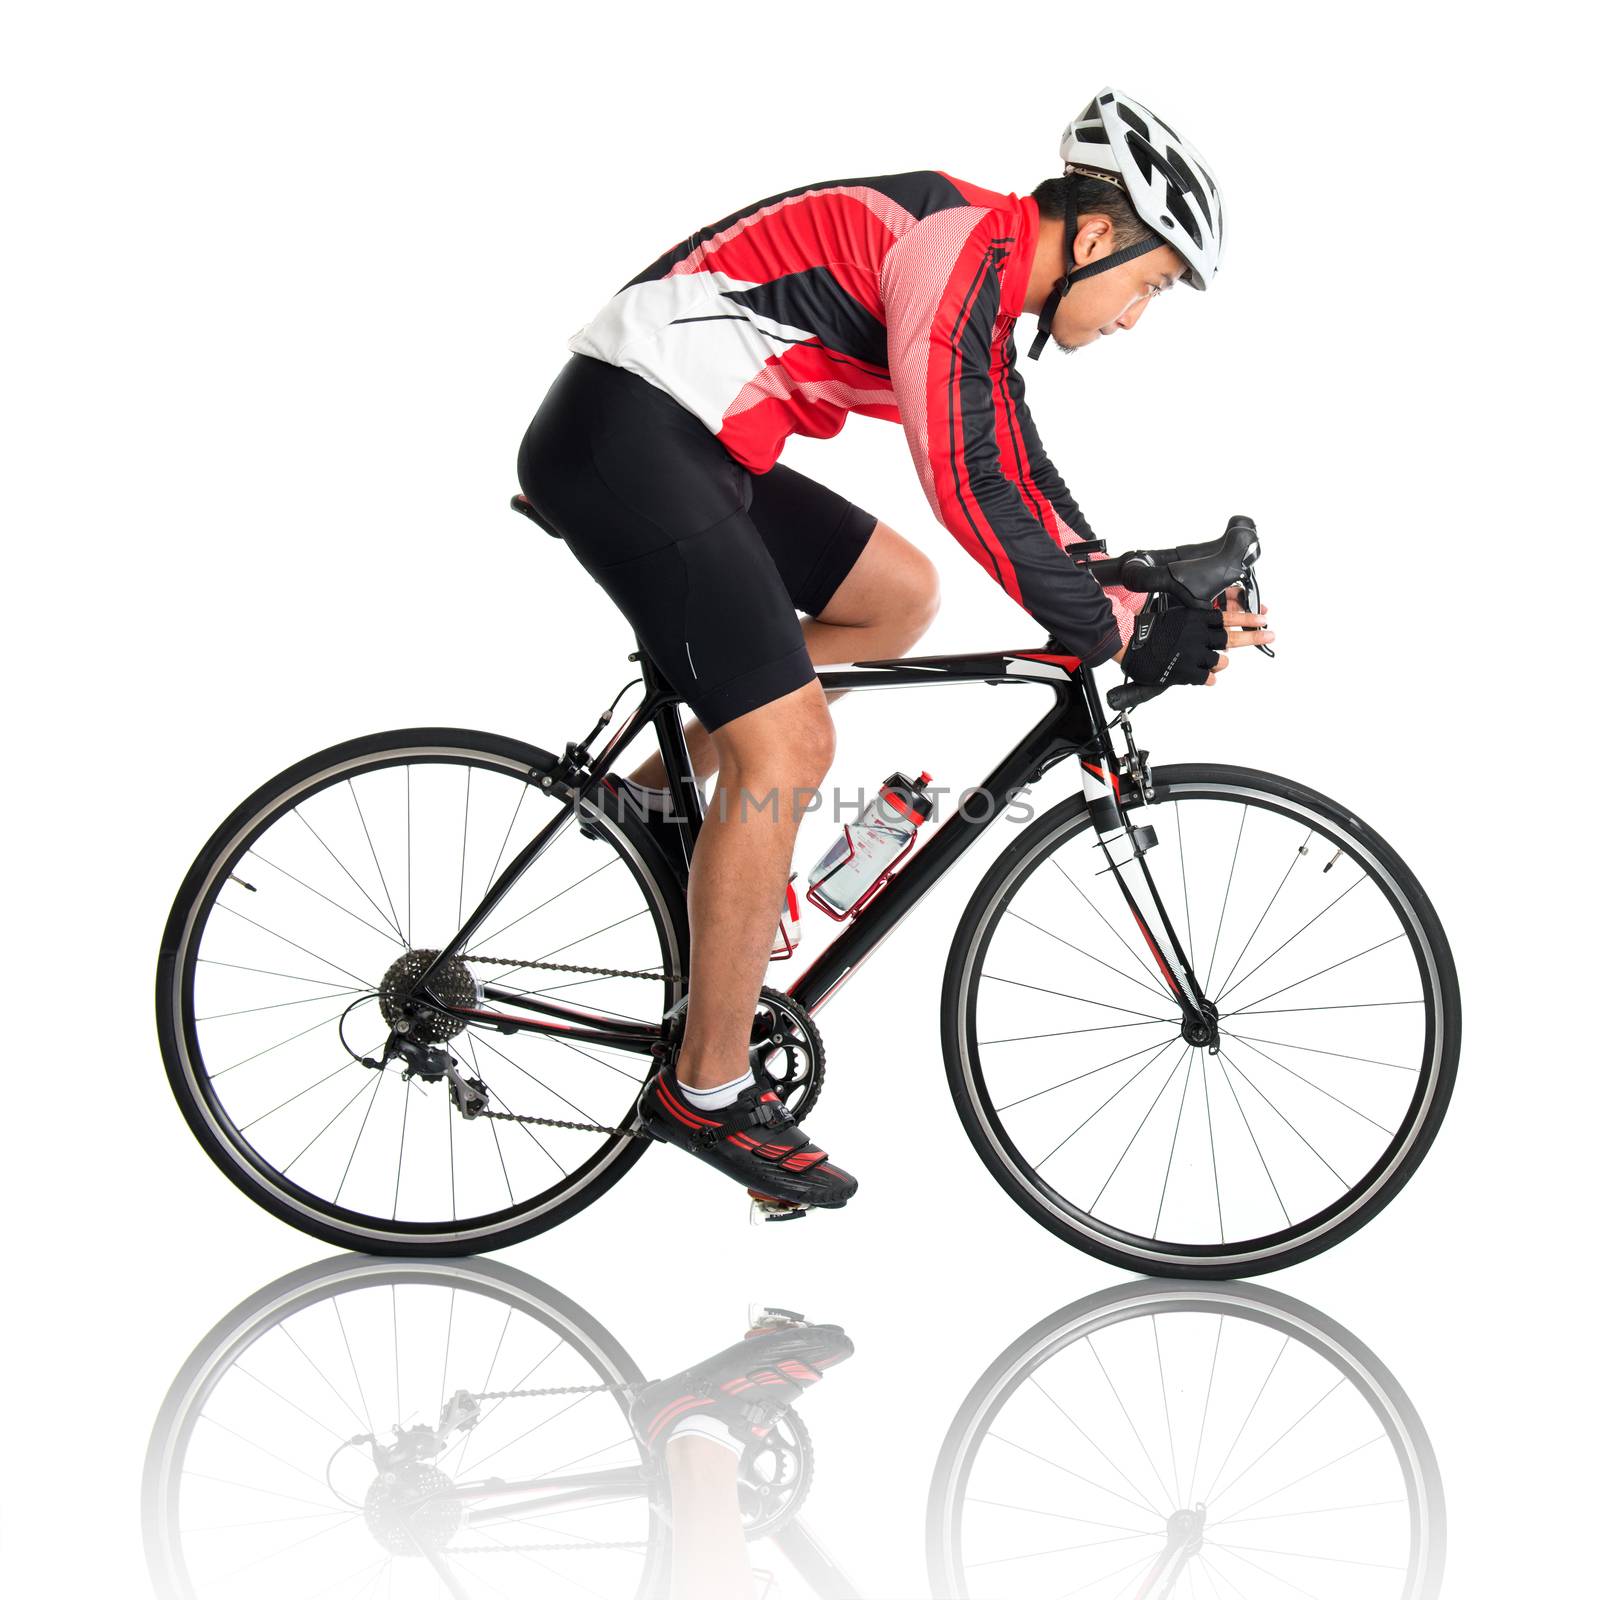 Asian male cyclist riding road bicycle, side view isolated on white background.